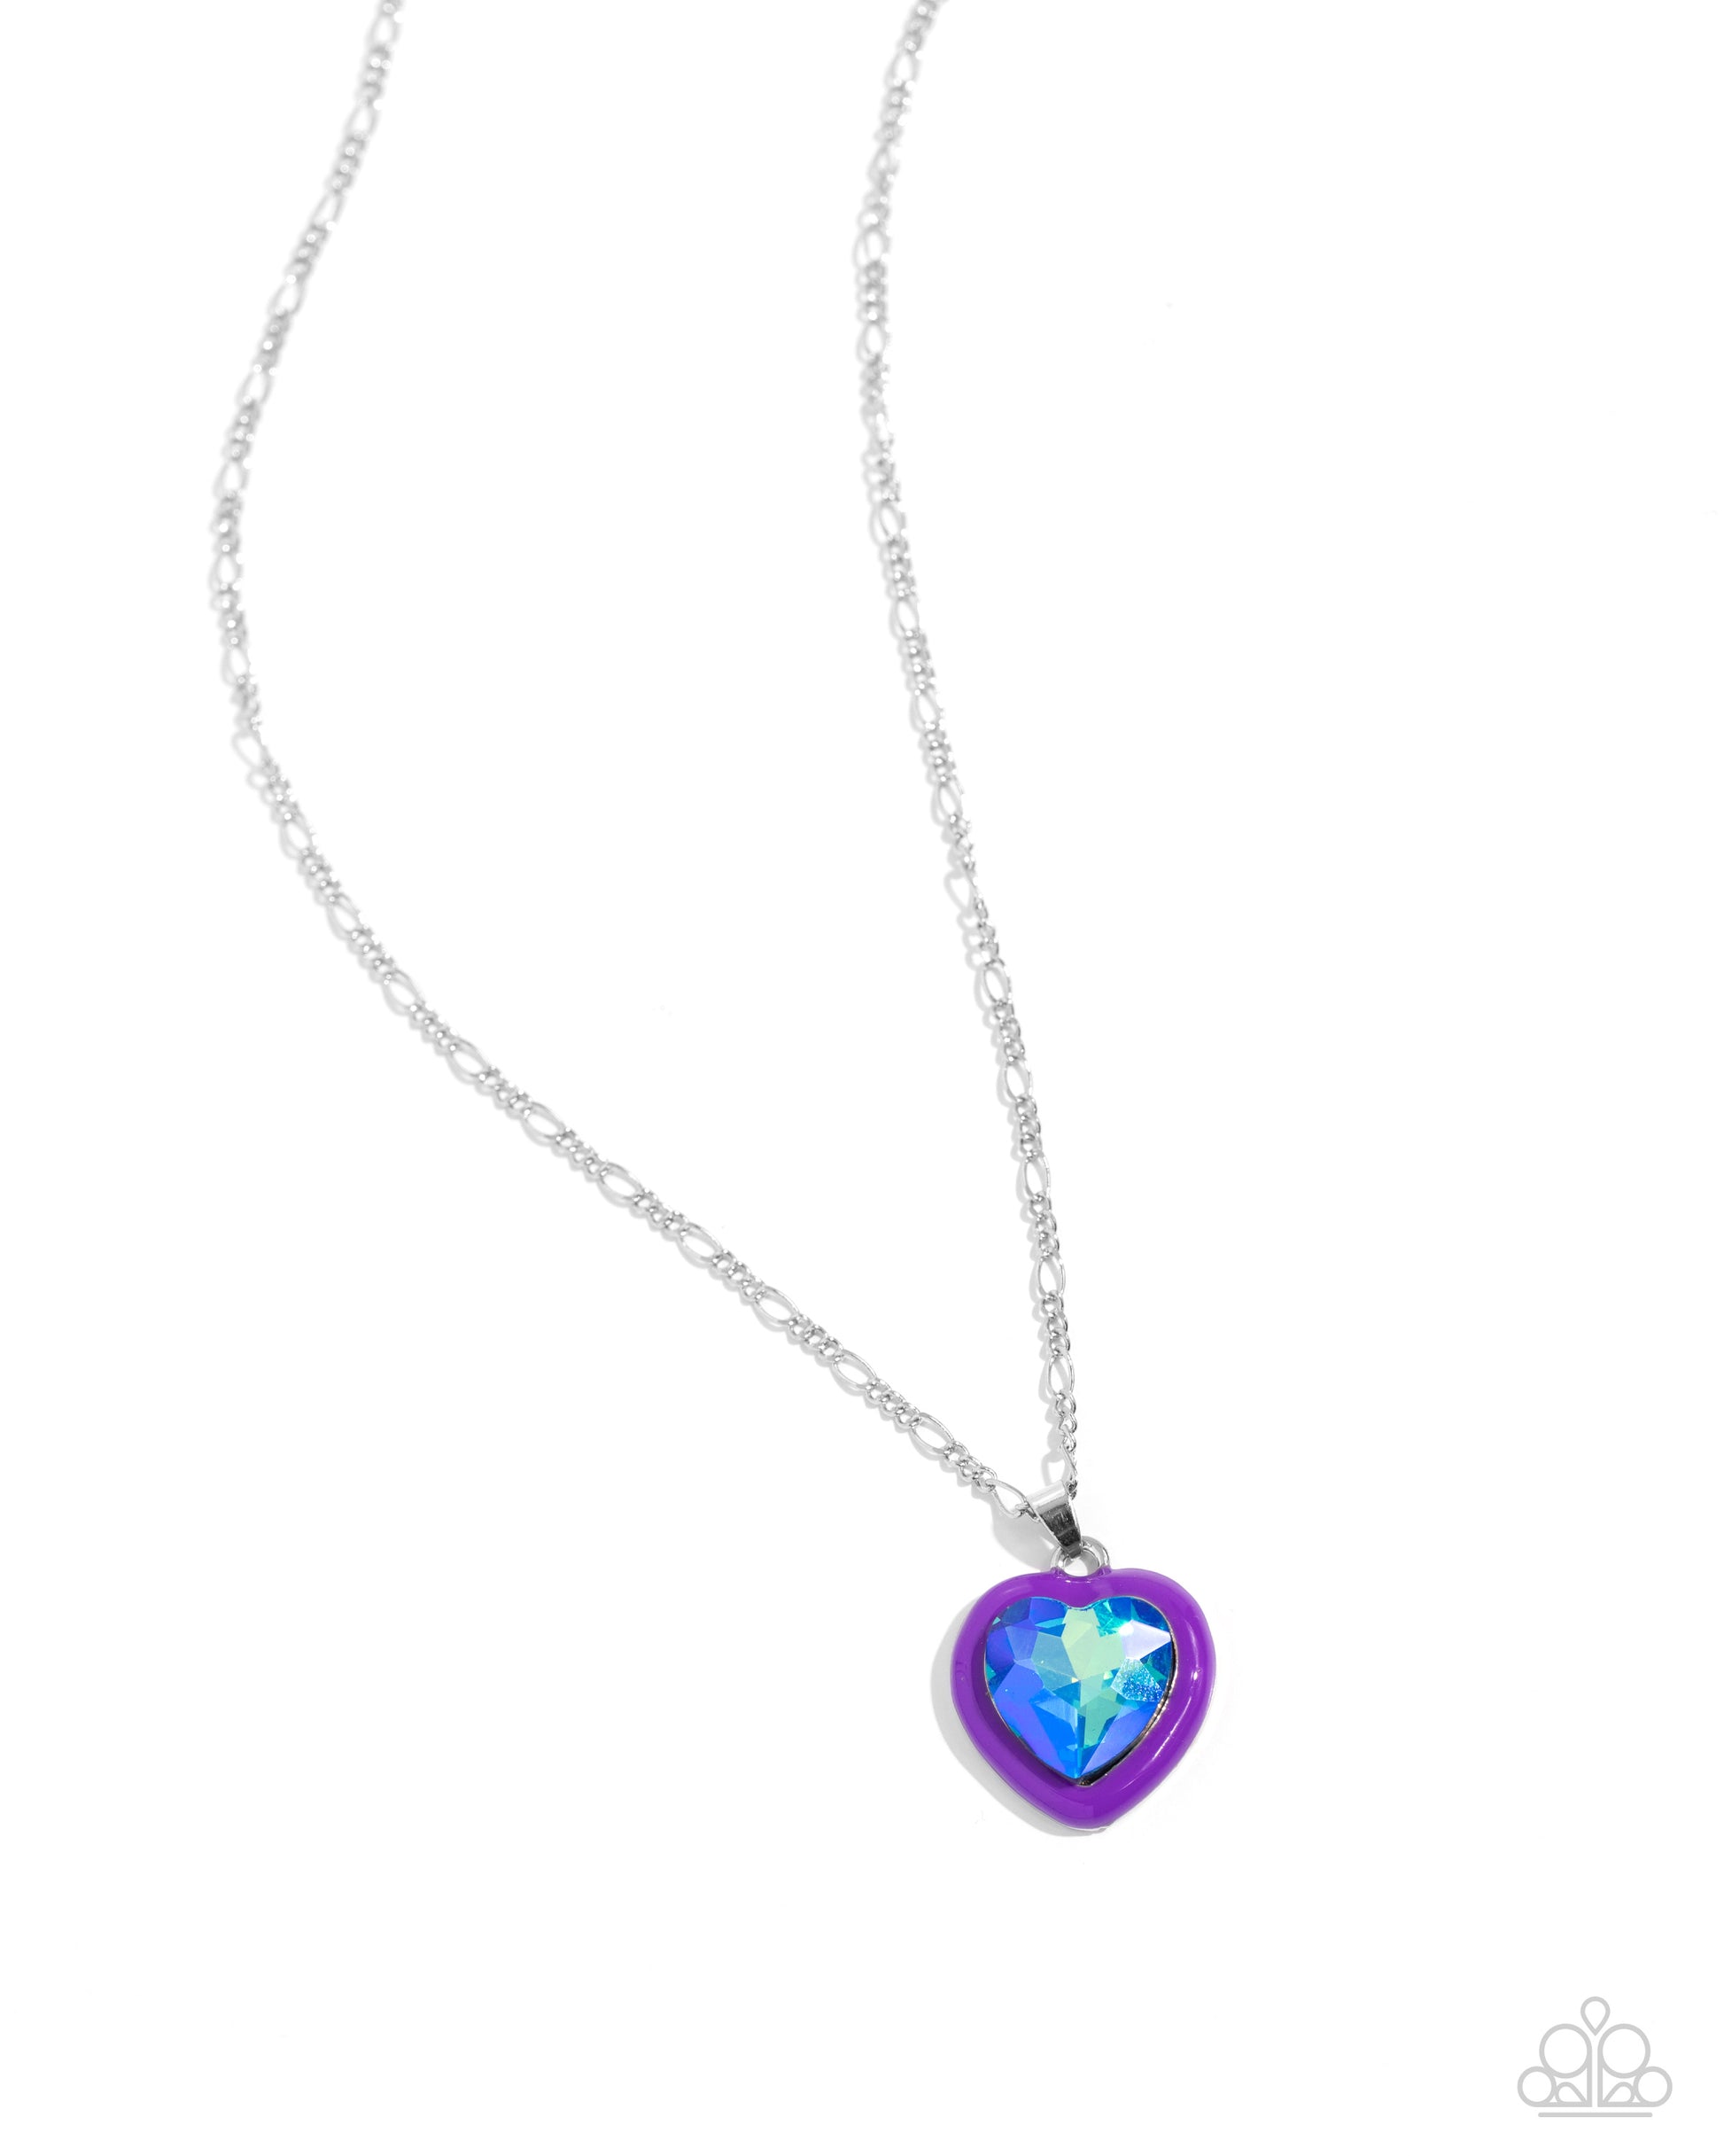 Heartfelt Hope Purple Necklace - Paparazzi Accessories Pressed in a border of purple paint, an oversized UV shimmery heart gem is flirtatiously attached to a silver figaro chain, resulting in a romantic-inspired display. Features an adjustable clasp closure. Sold as one individual necklace. Includes one pair of matching earrings. SKU: P2DA-PRXX-151UM Get The Complete Look! Earring: "Heartfelt Haute - Purple" (Sold Separately)